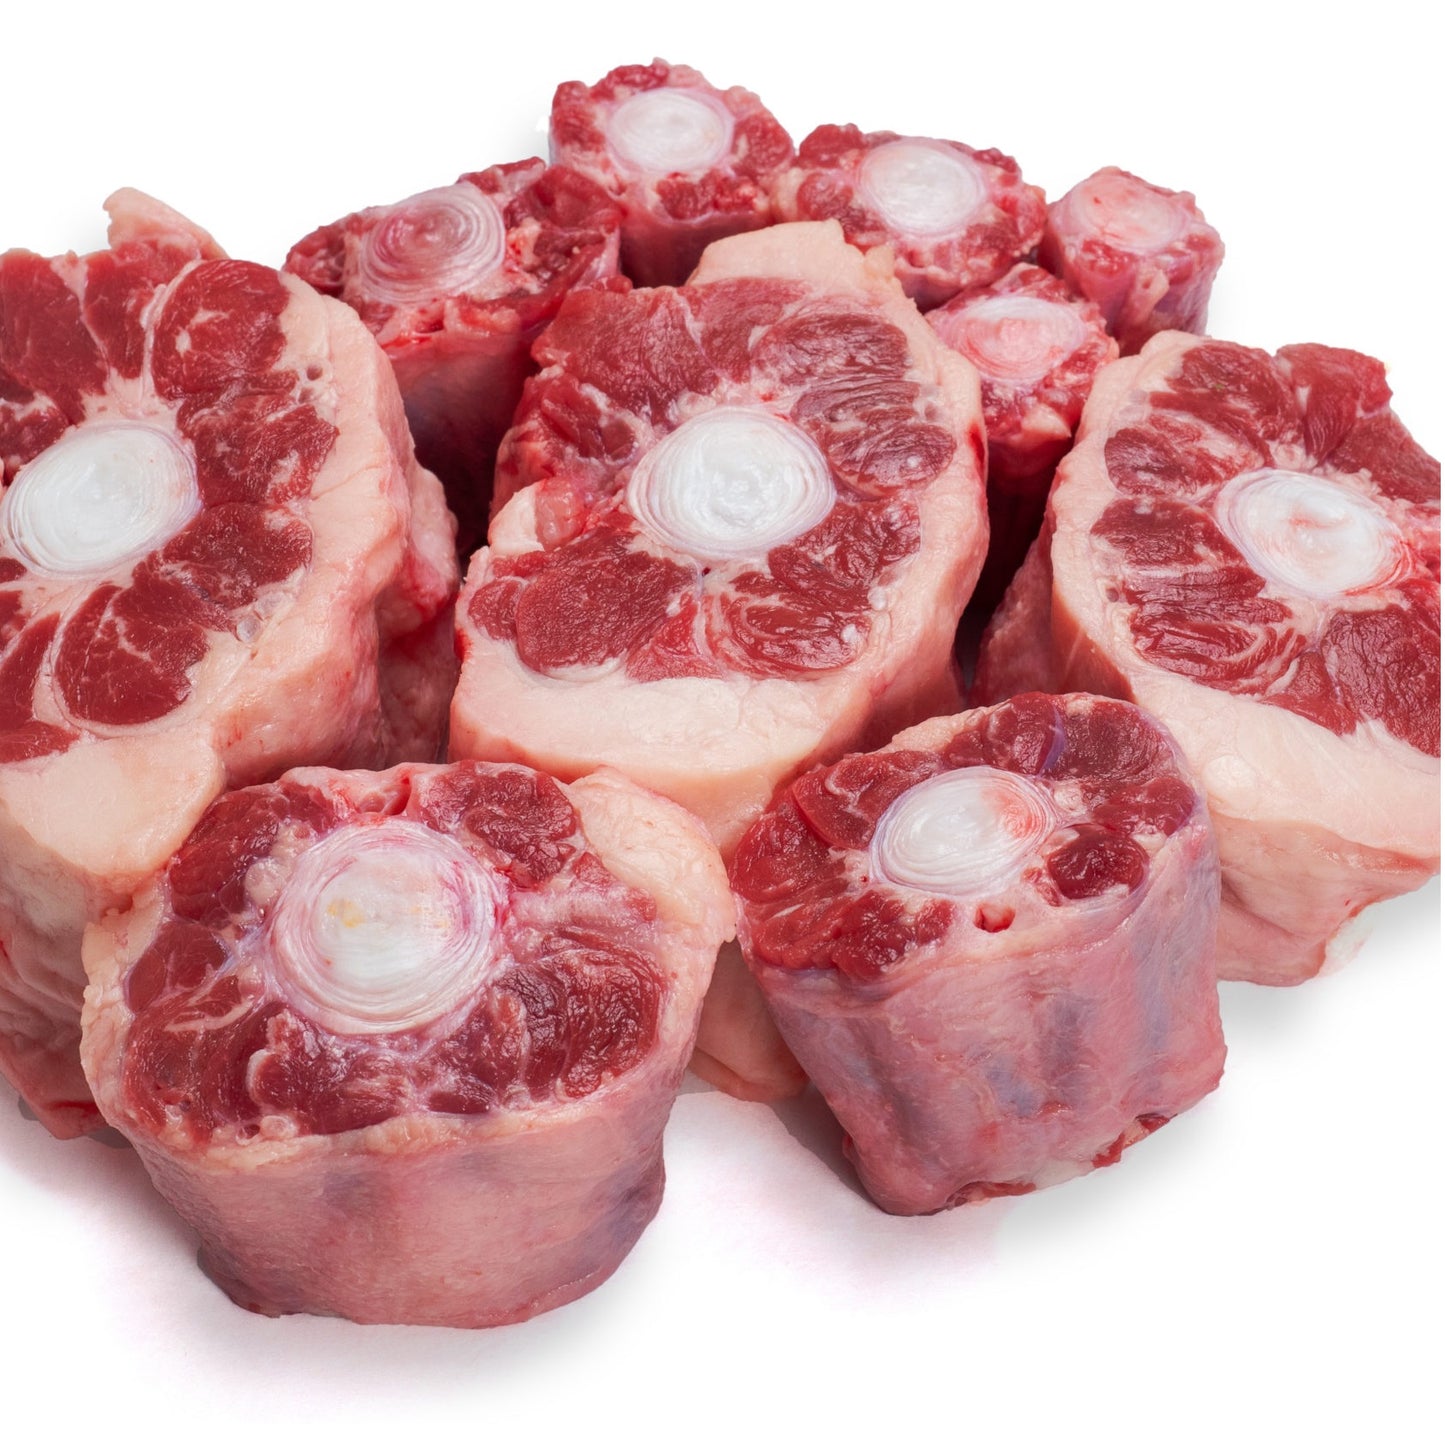 Beef Oxtail (Trimmed)